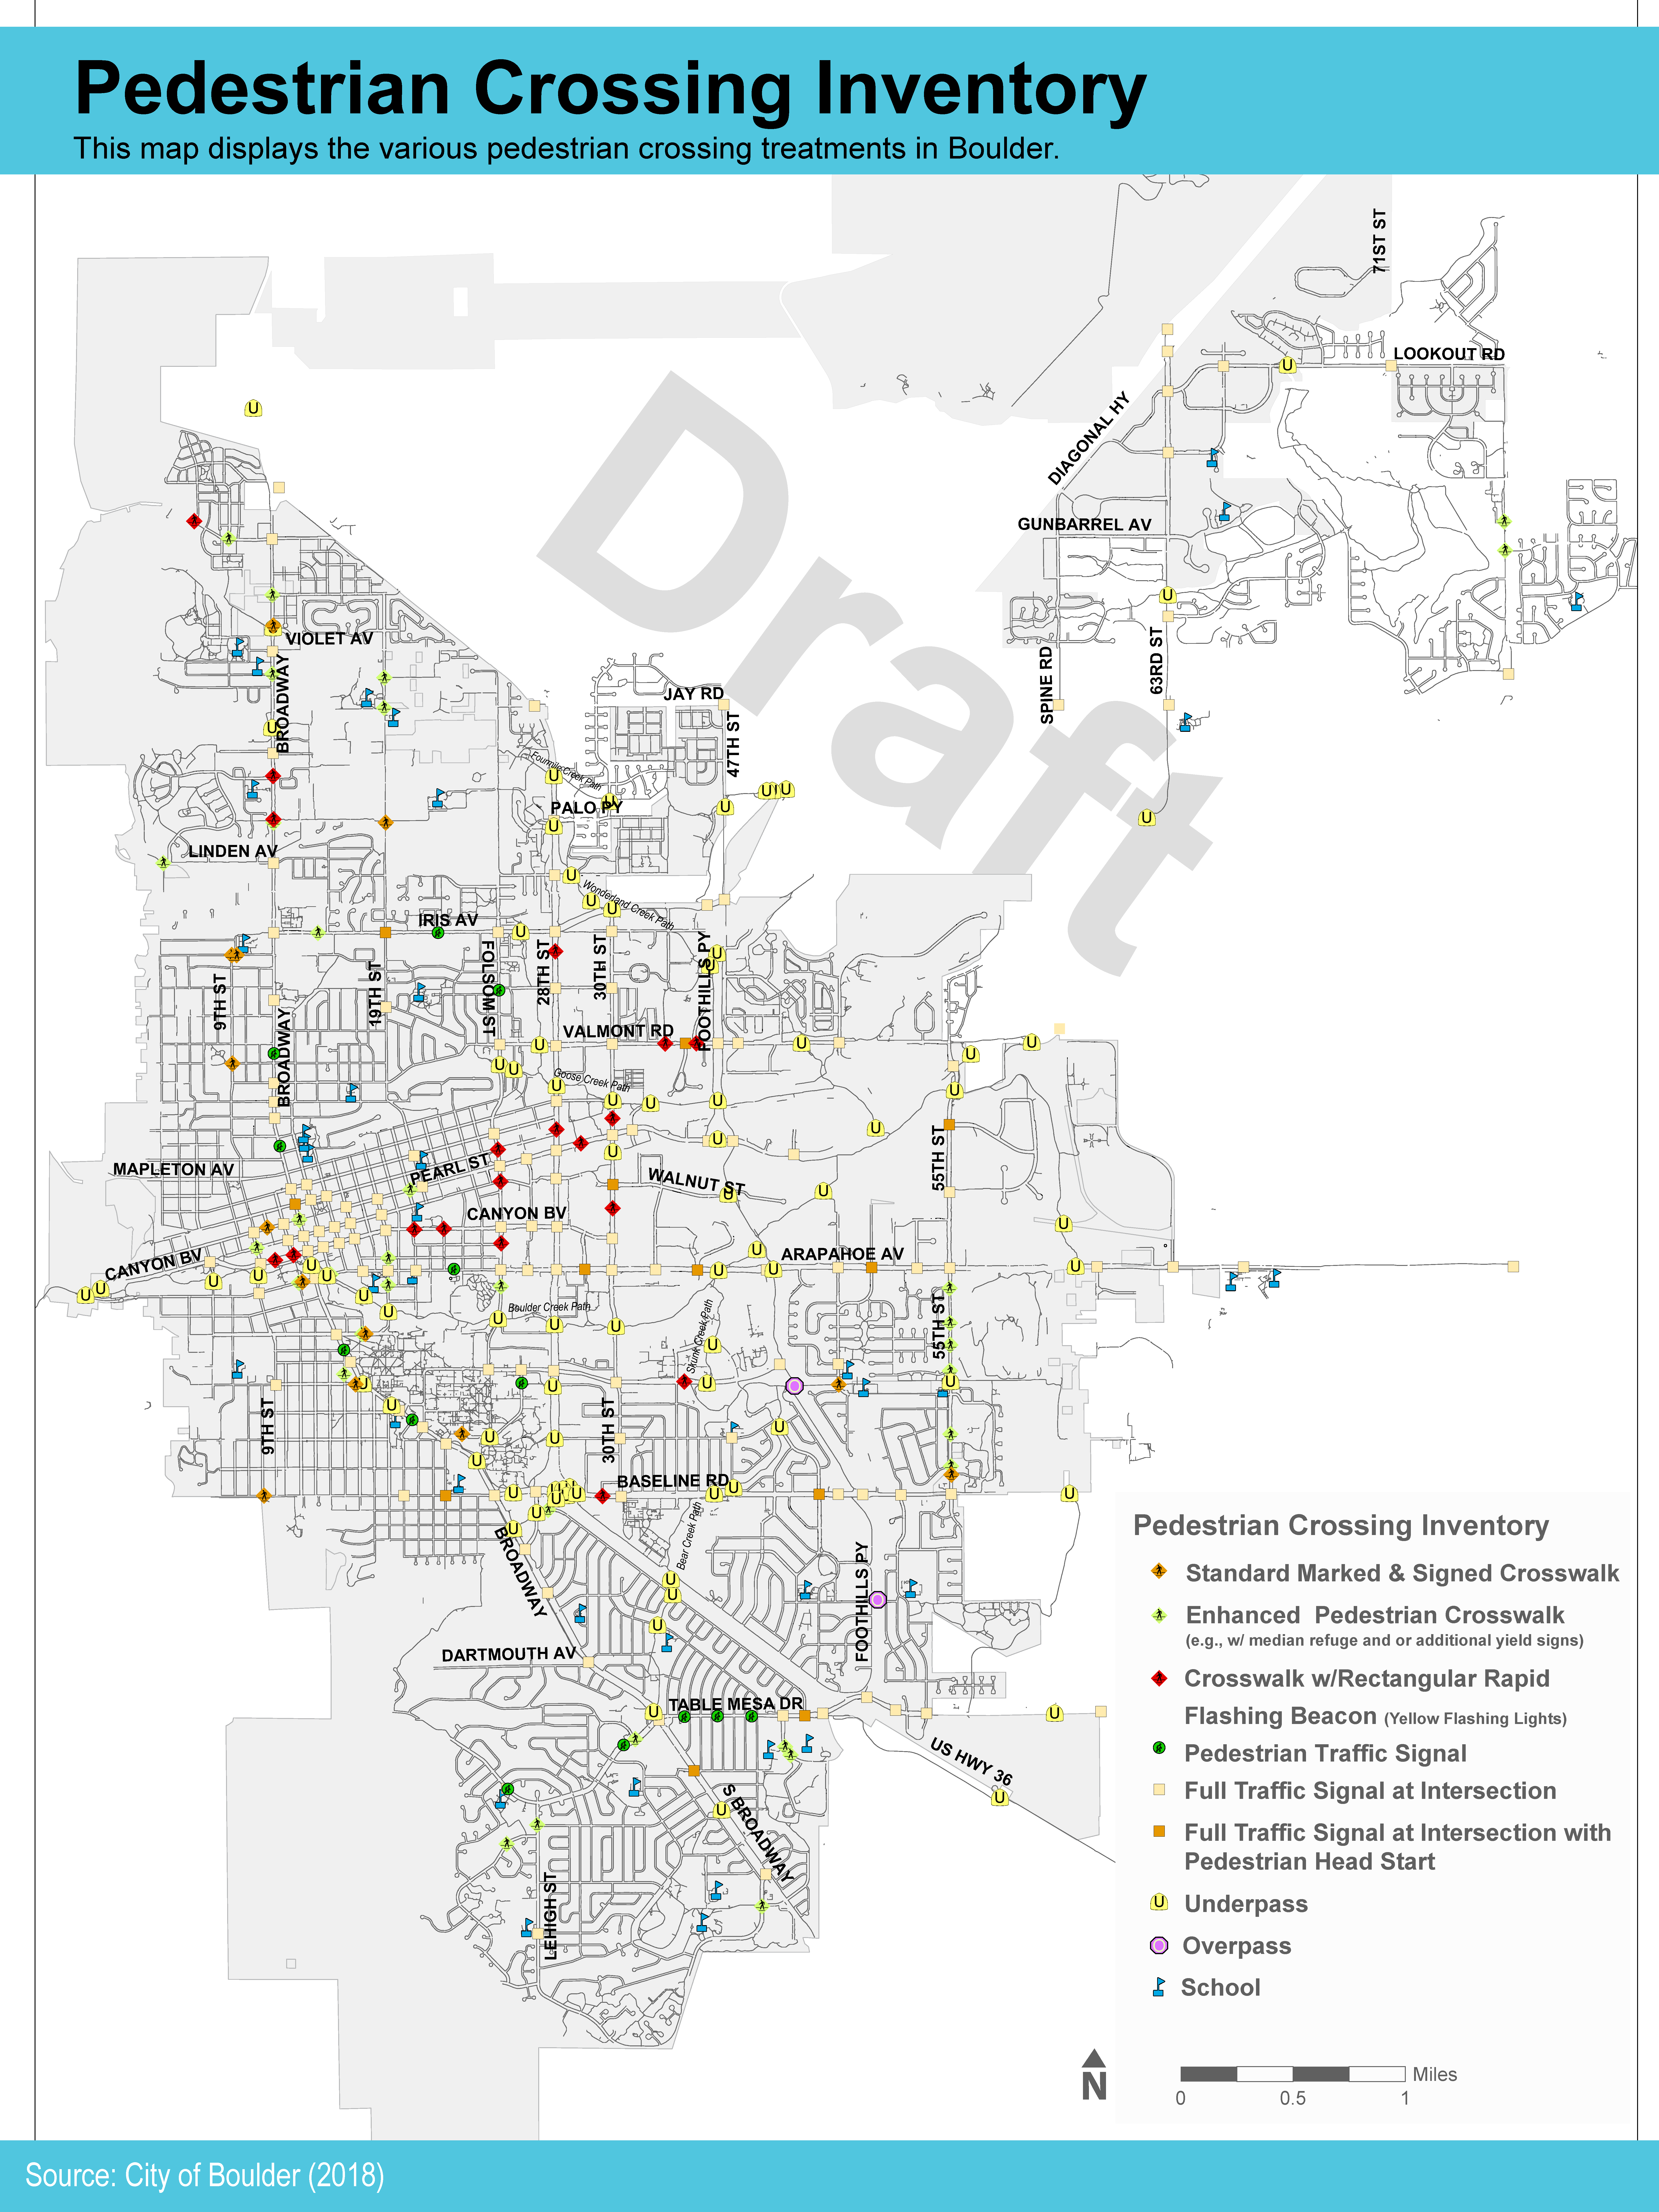 An inventory map of pedestrian crossing treatments in the City of Boulder